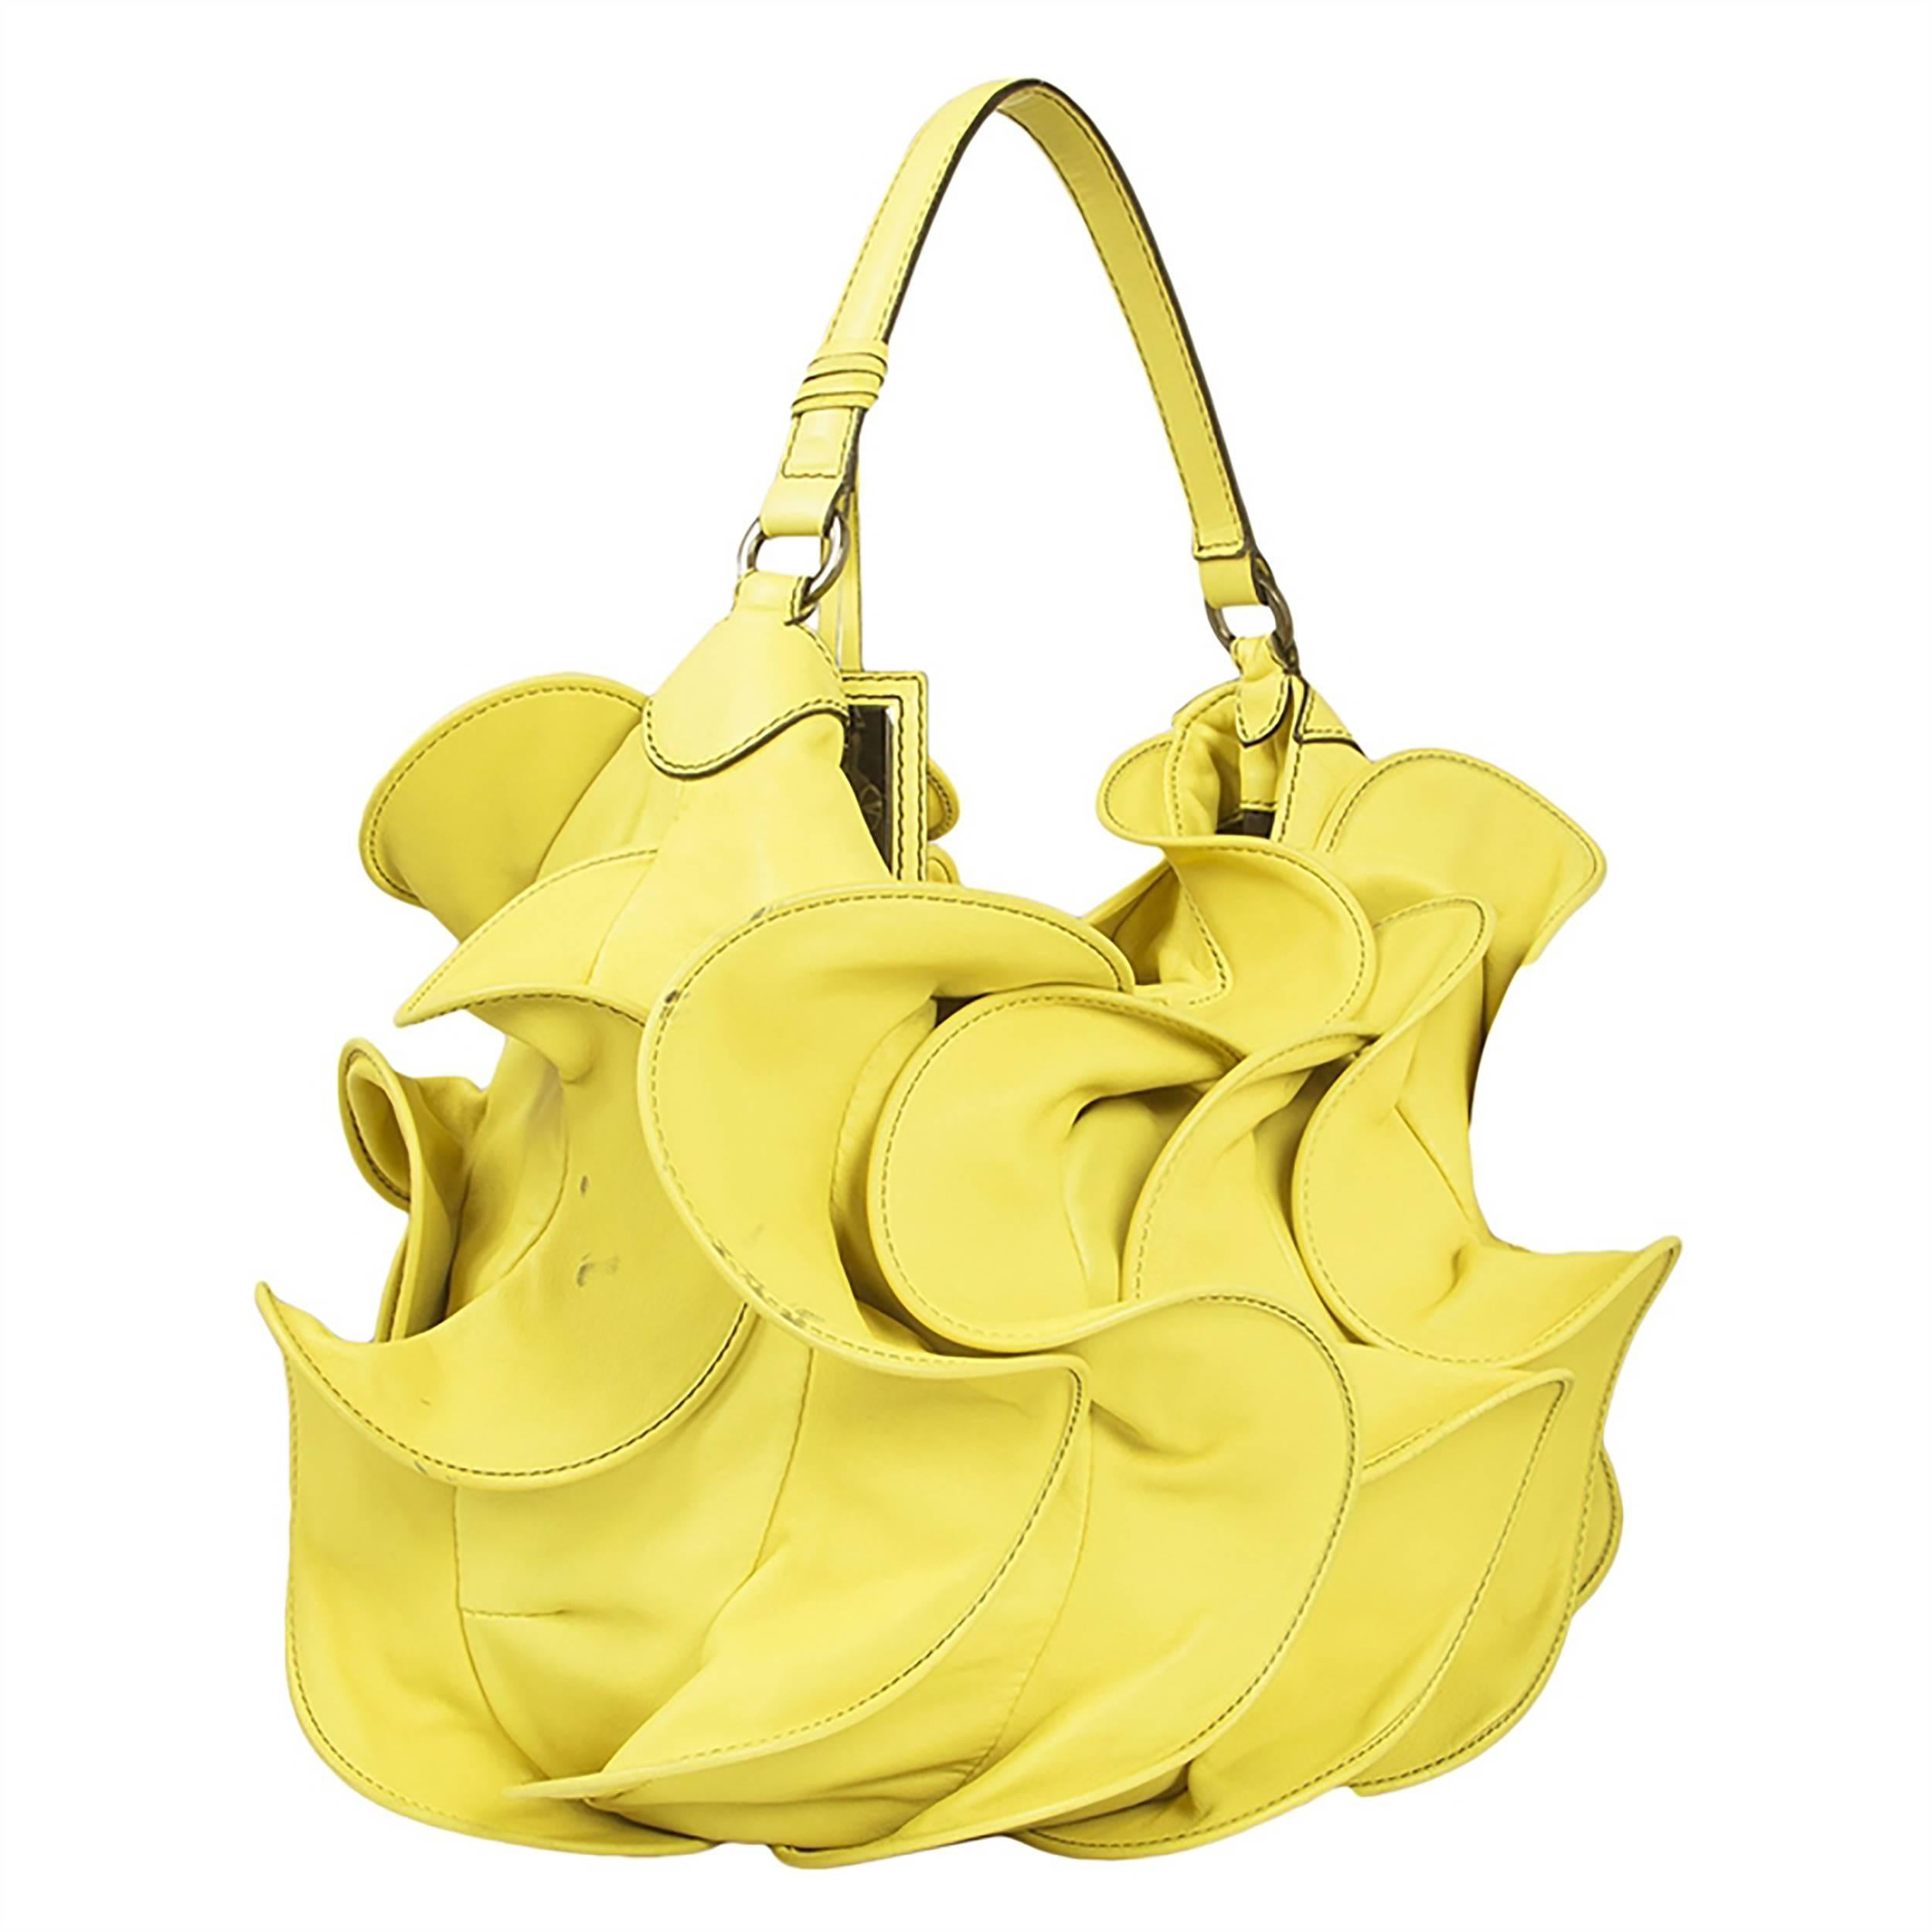 A joyful creation from Valentino brimming with the romantic fantasy at the heart of the brand. This handbag is formed from ripples of yellow leather. Its black-lined interior contains one zipped pocket and two open pockets.

Material: